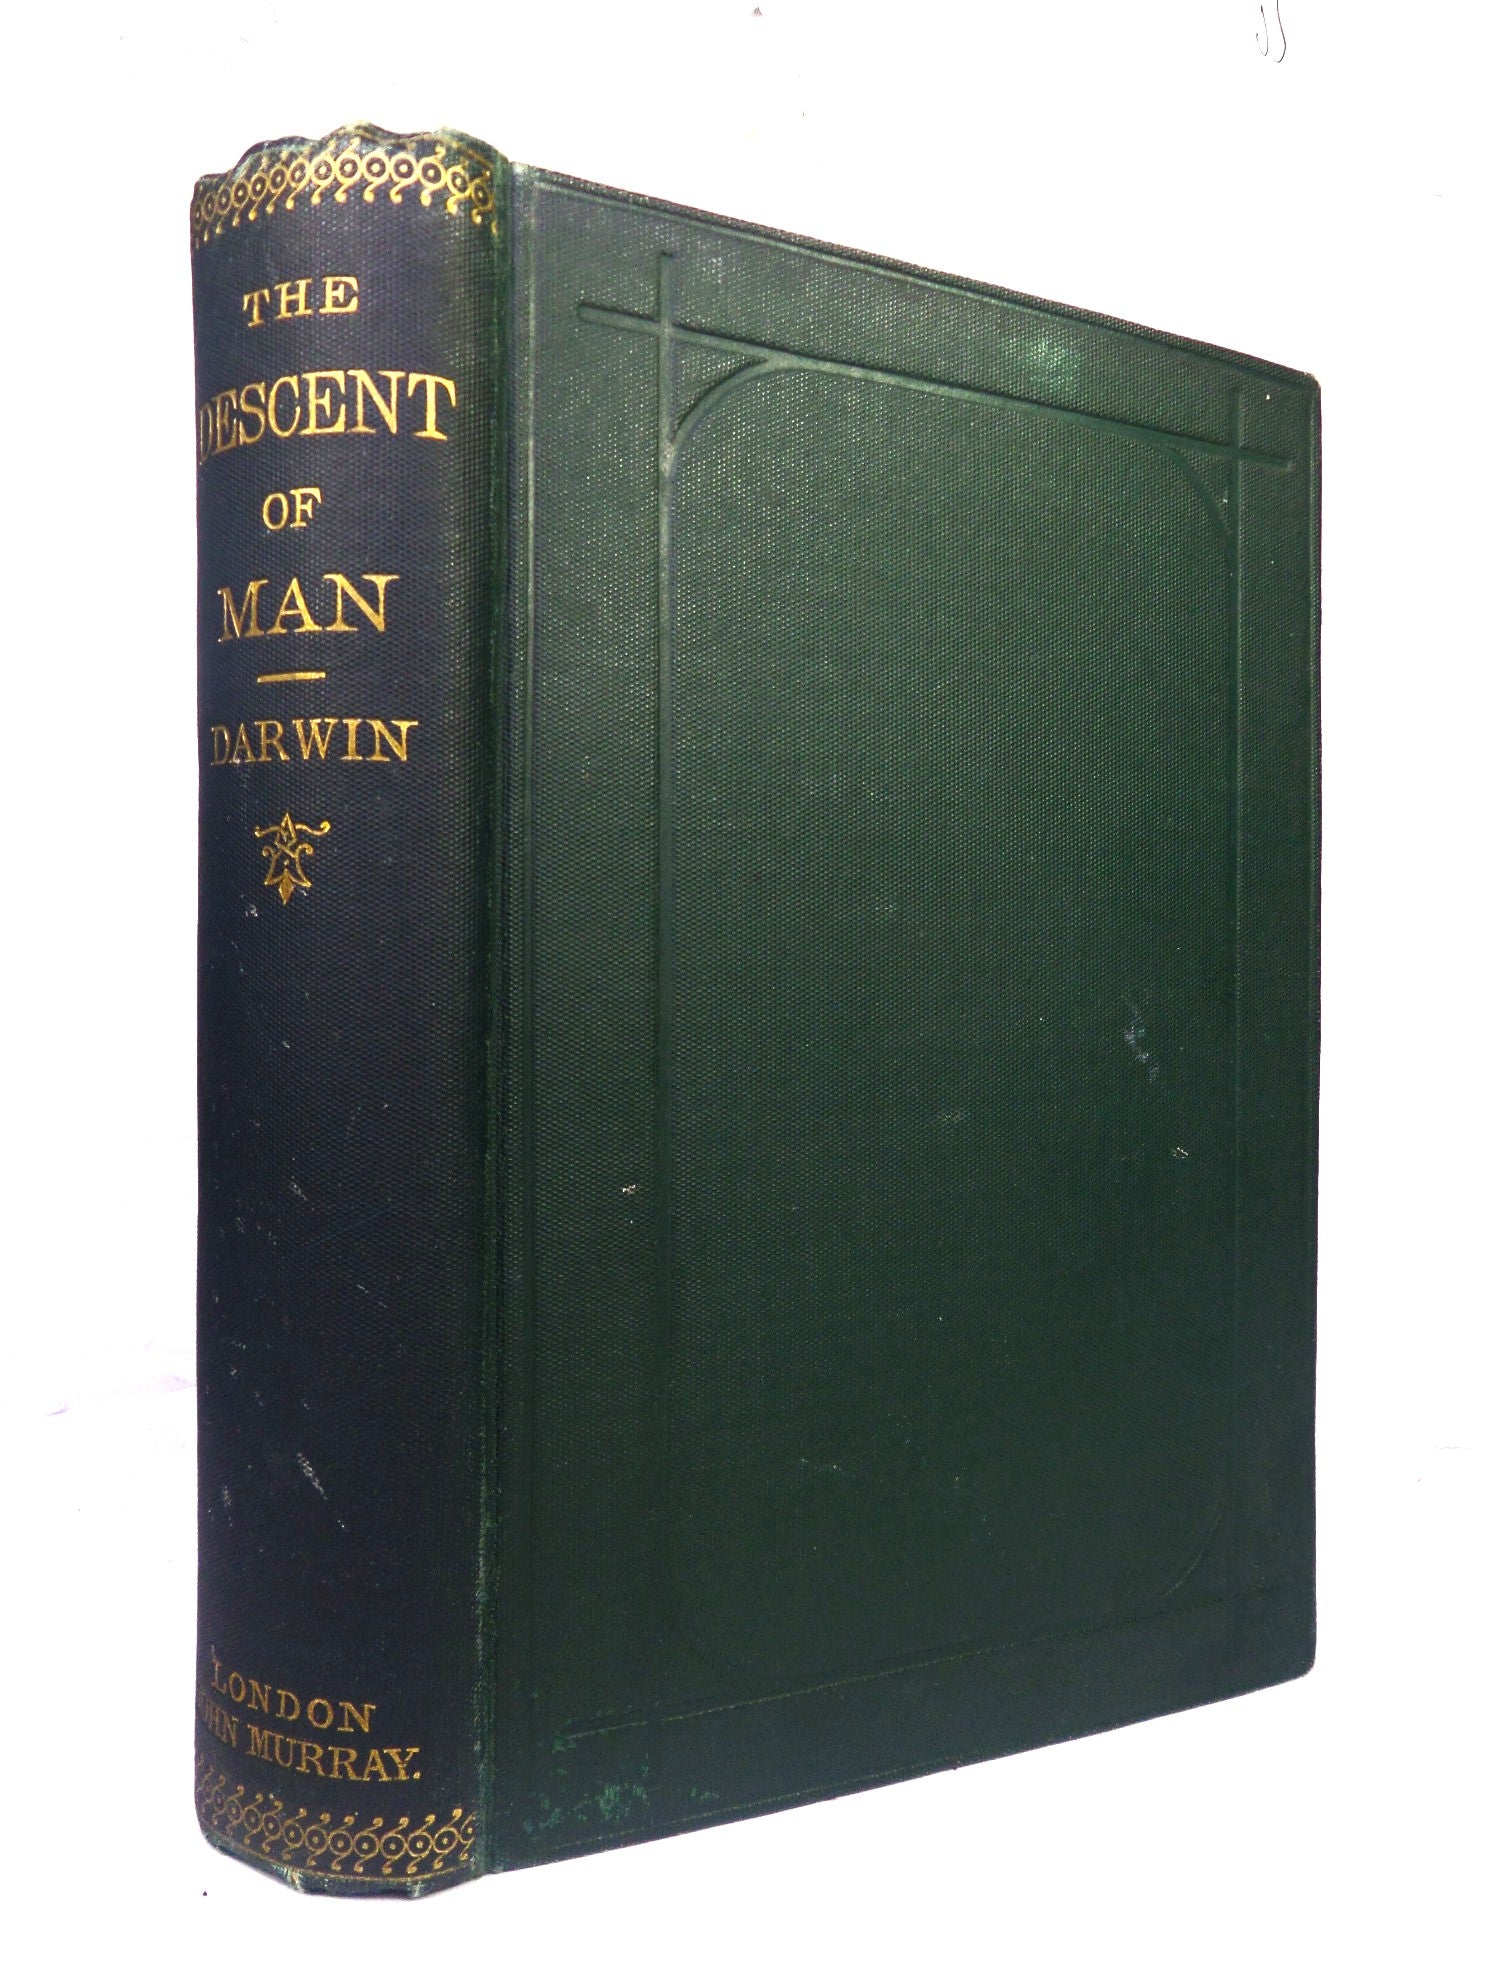 THE DESCENT OF MAN BY CHARLES DARWIN 1890 SECOND REVISED EDITION